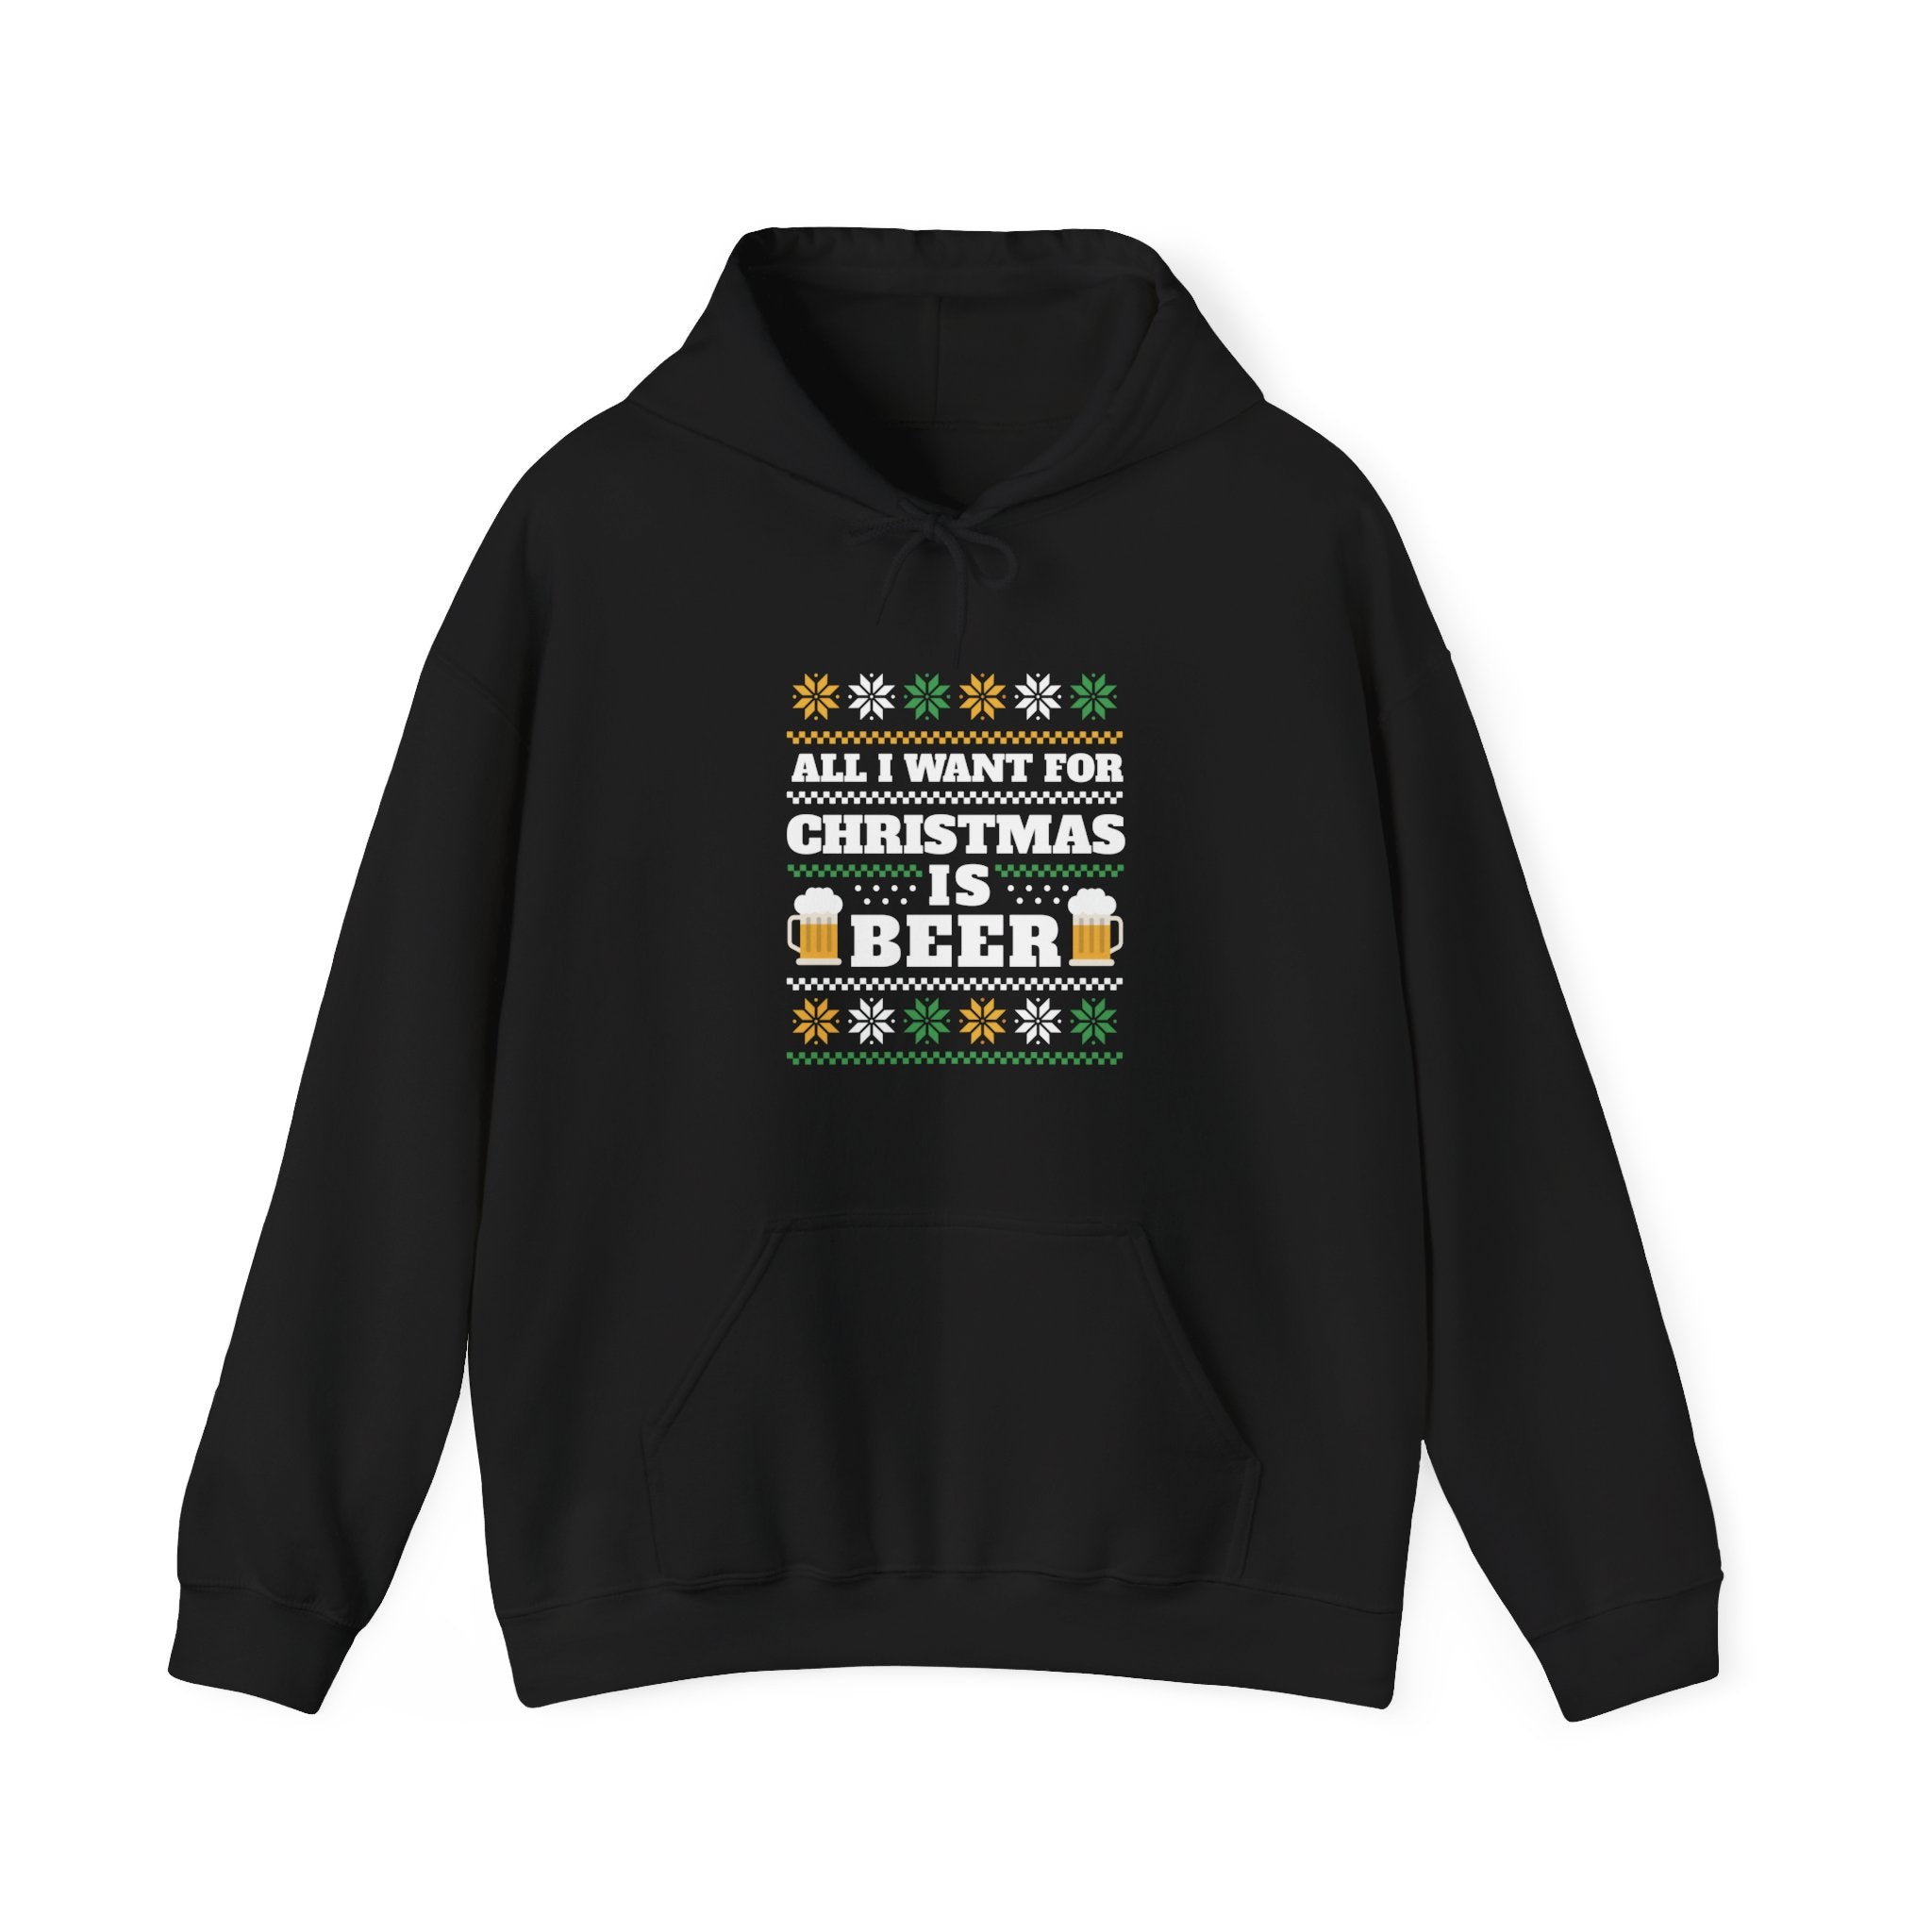 Cozy black hooded sweatshirt with a festive design. The text says, "All I want for Christmas is Beer," accompanied by images of beer mugs and snowflakes—your perfect Beer Ugly Sweater - Hooded Sweatshirt for holiday cheer.